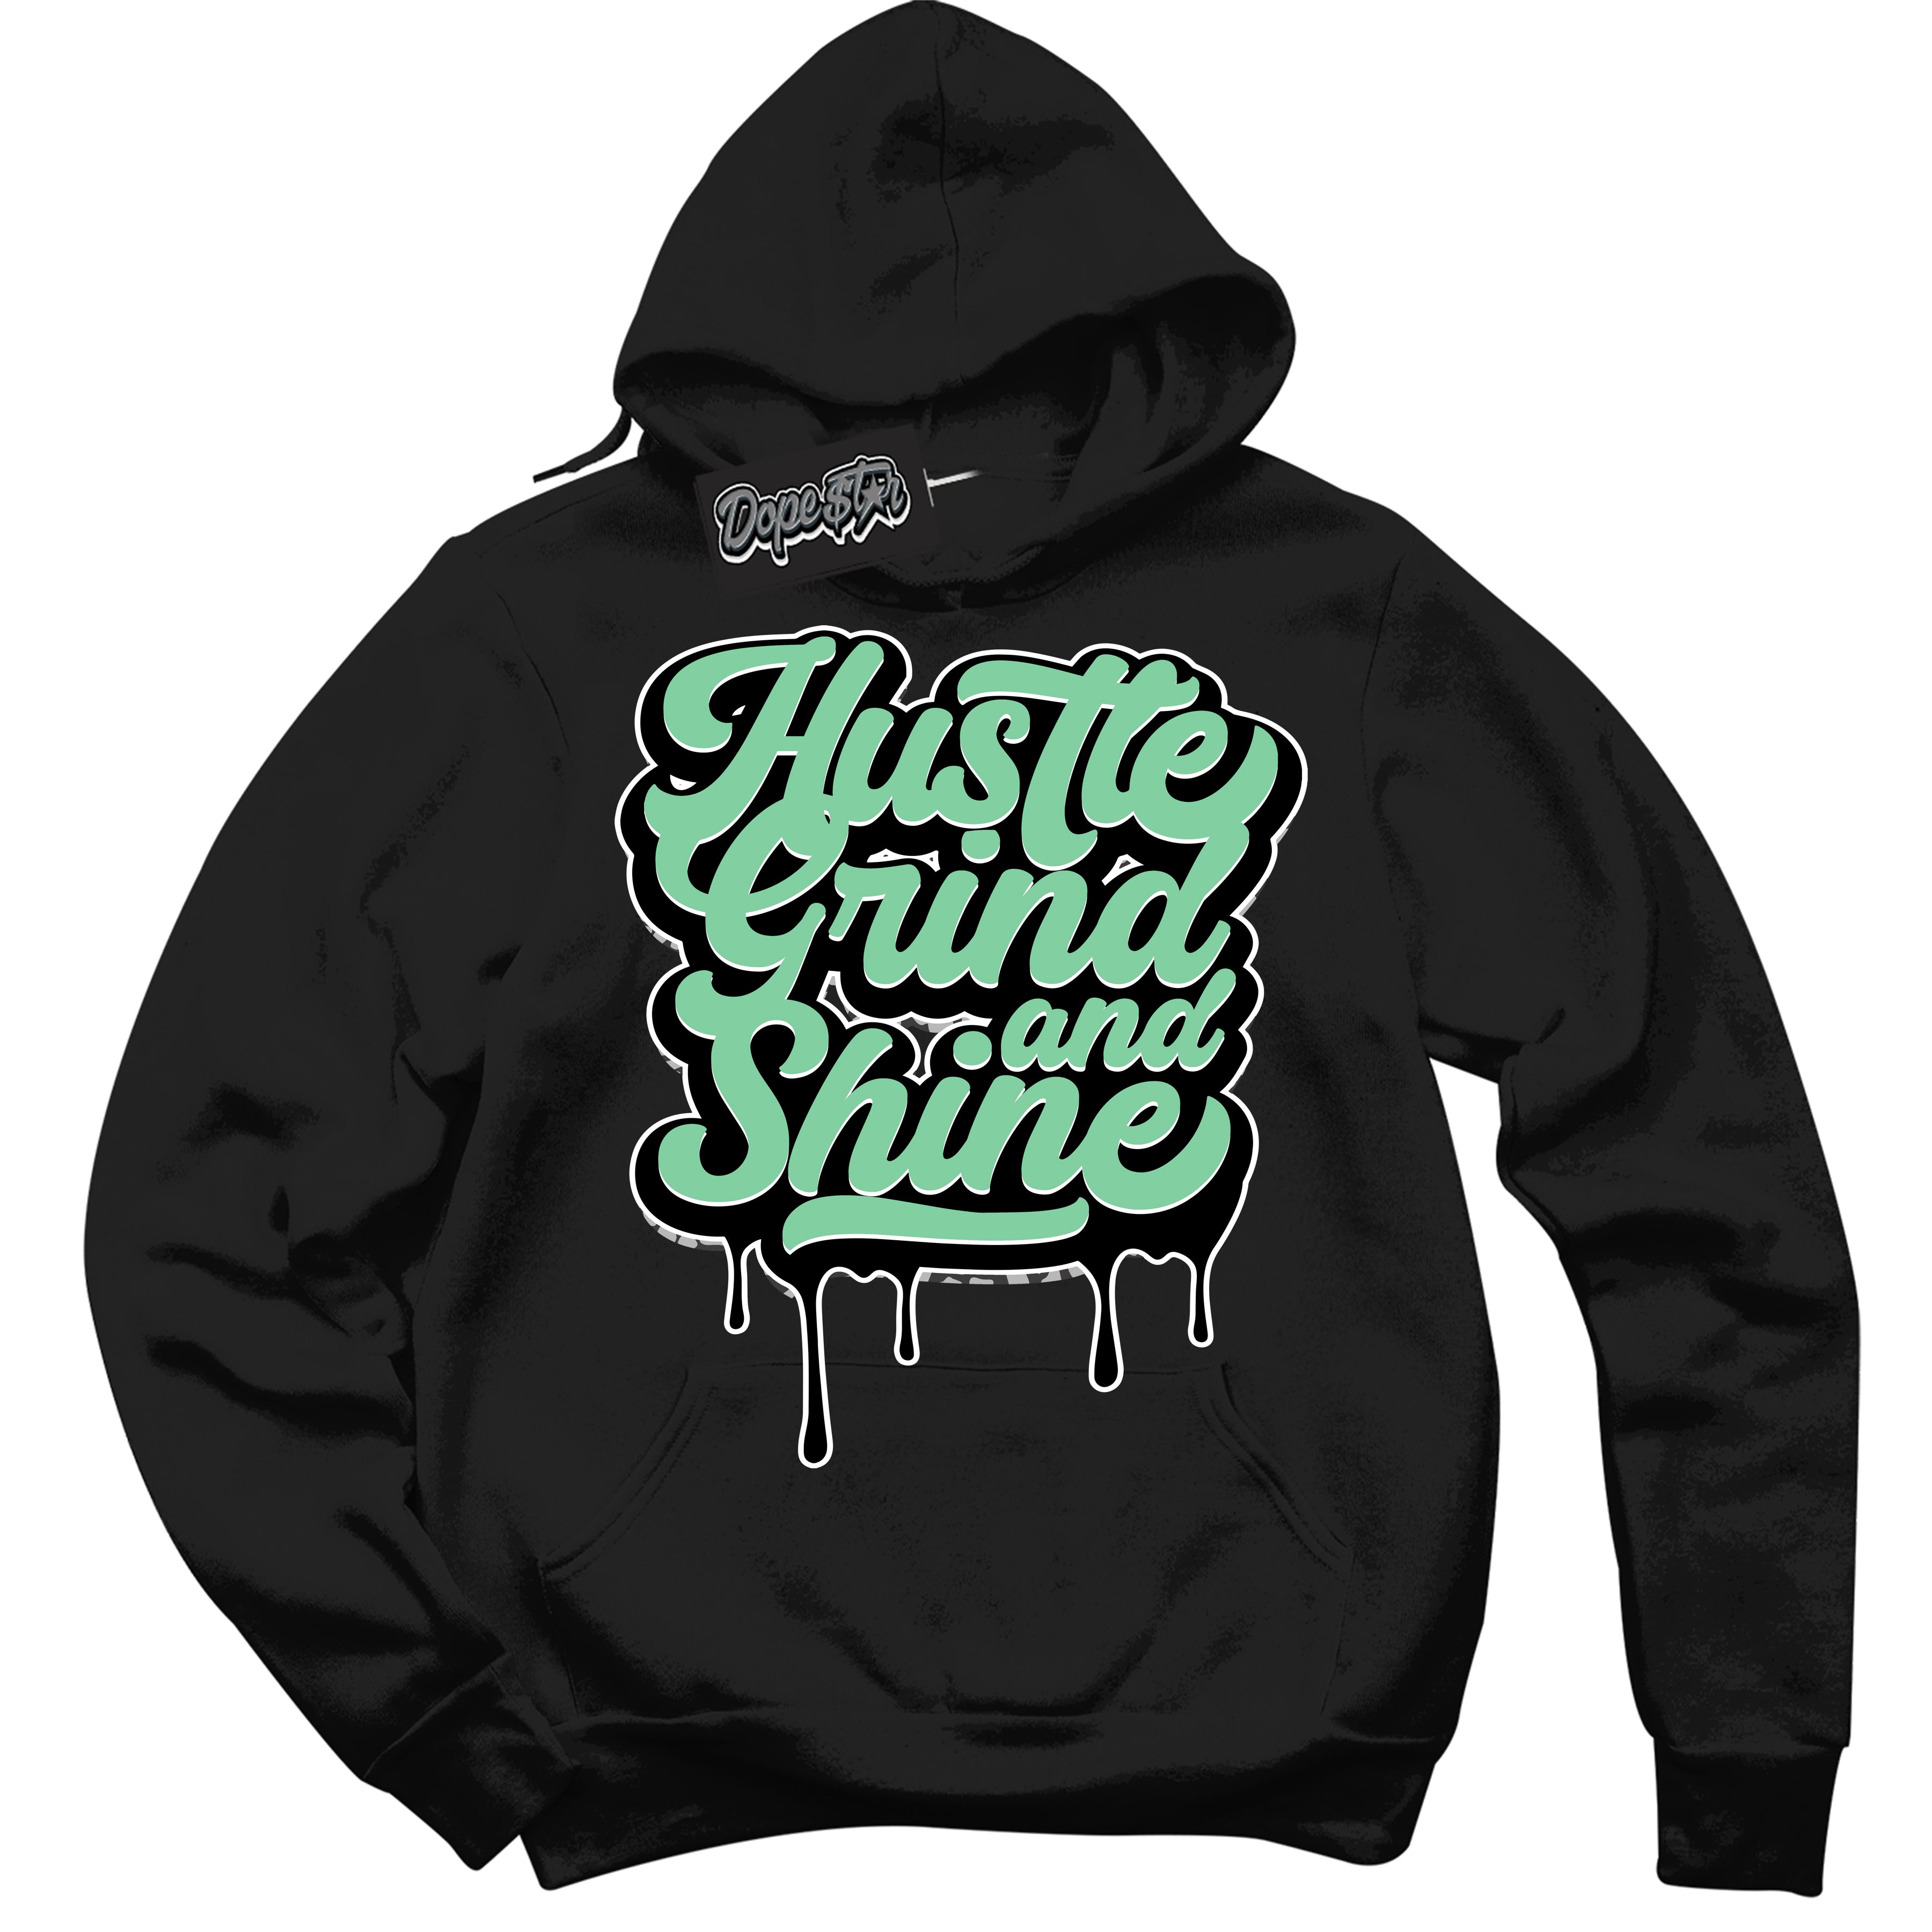 Cool Black Graphic DopeStar Hoodie with “ Hustle Grind And Shine “ print, that perfectly matches Green Glow 3S sneakers